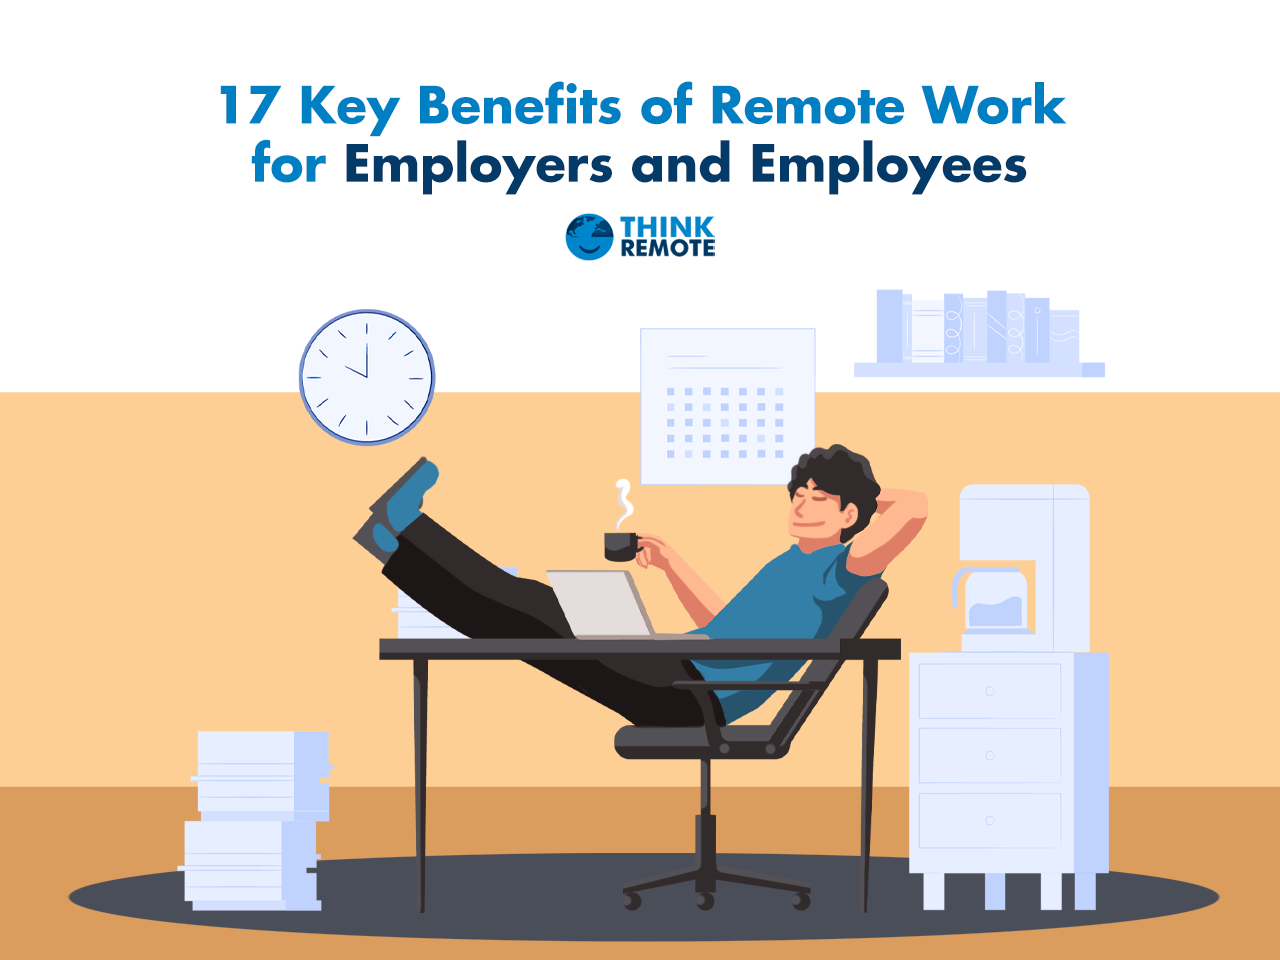 https://thinkremote.com/wp-content/uploads/2021/05/Key-Benefits-of-Remote-Work-for-Employers-and-Employees.png